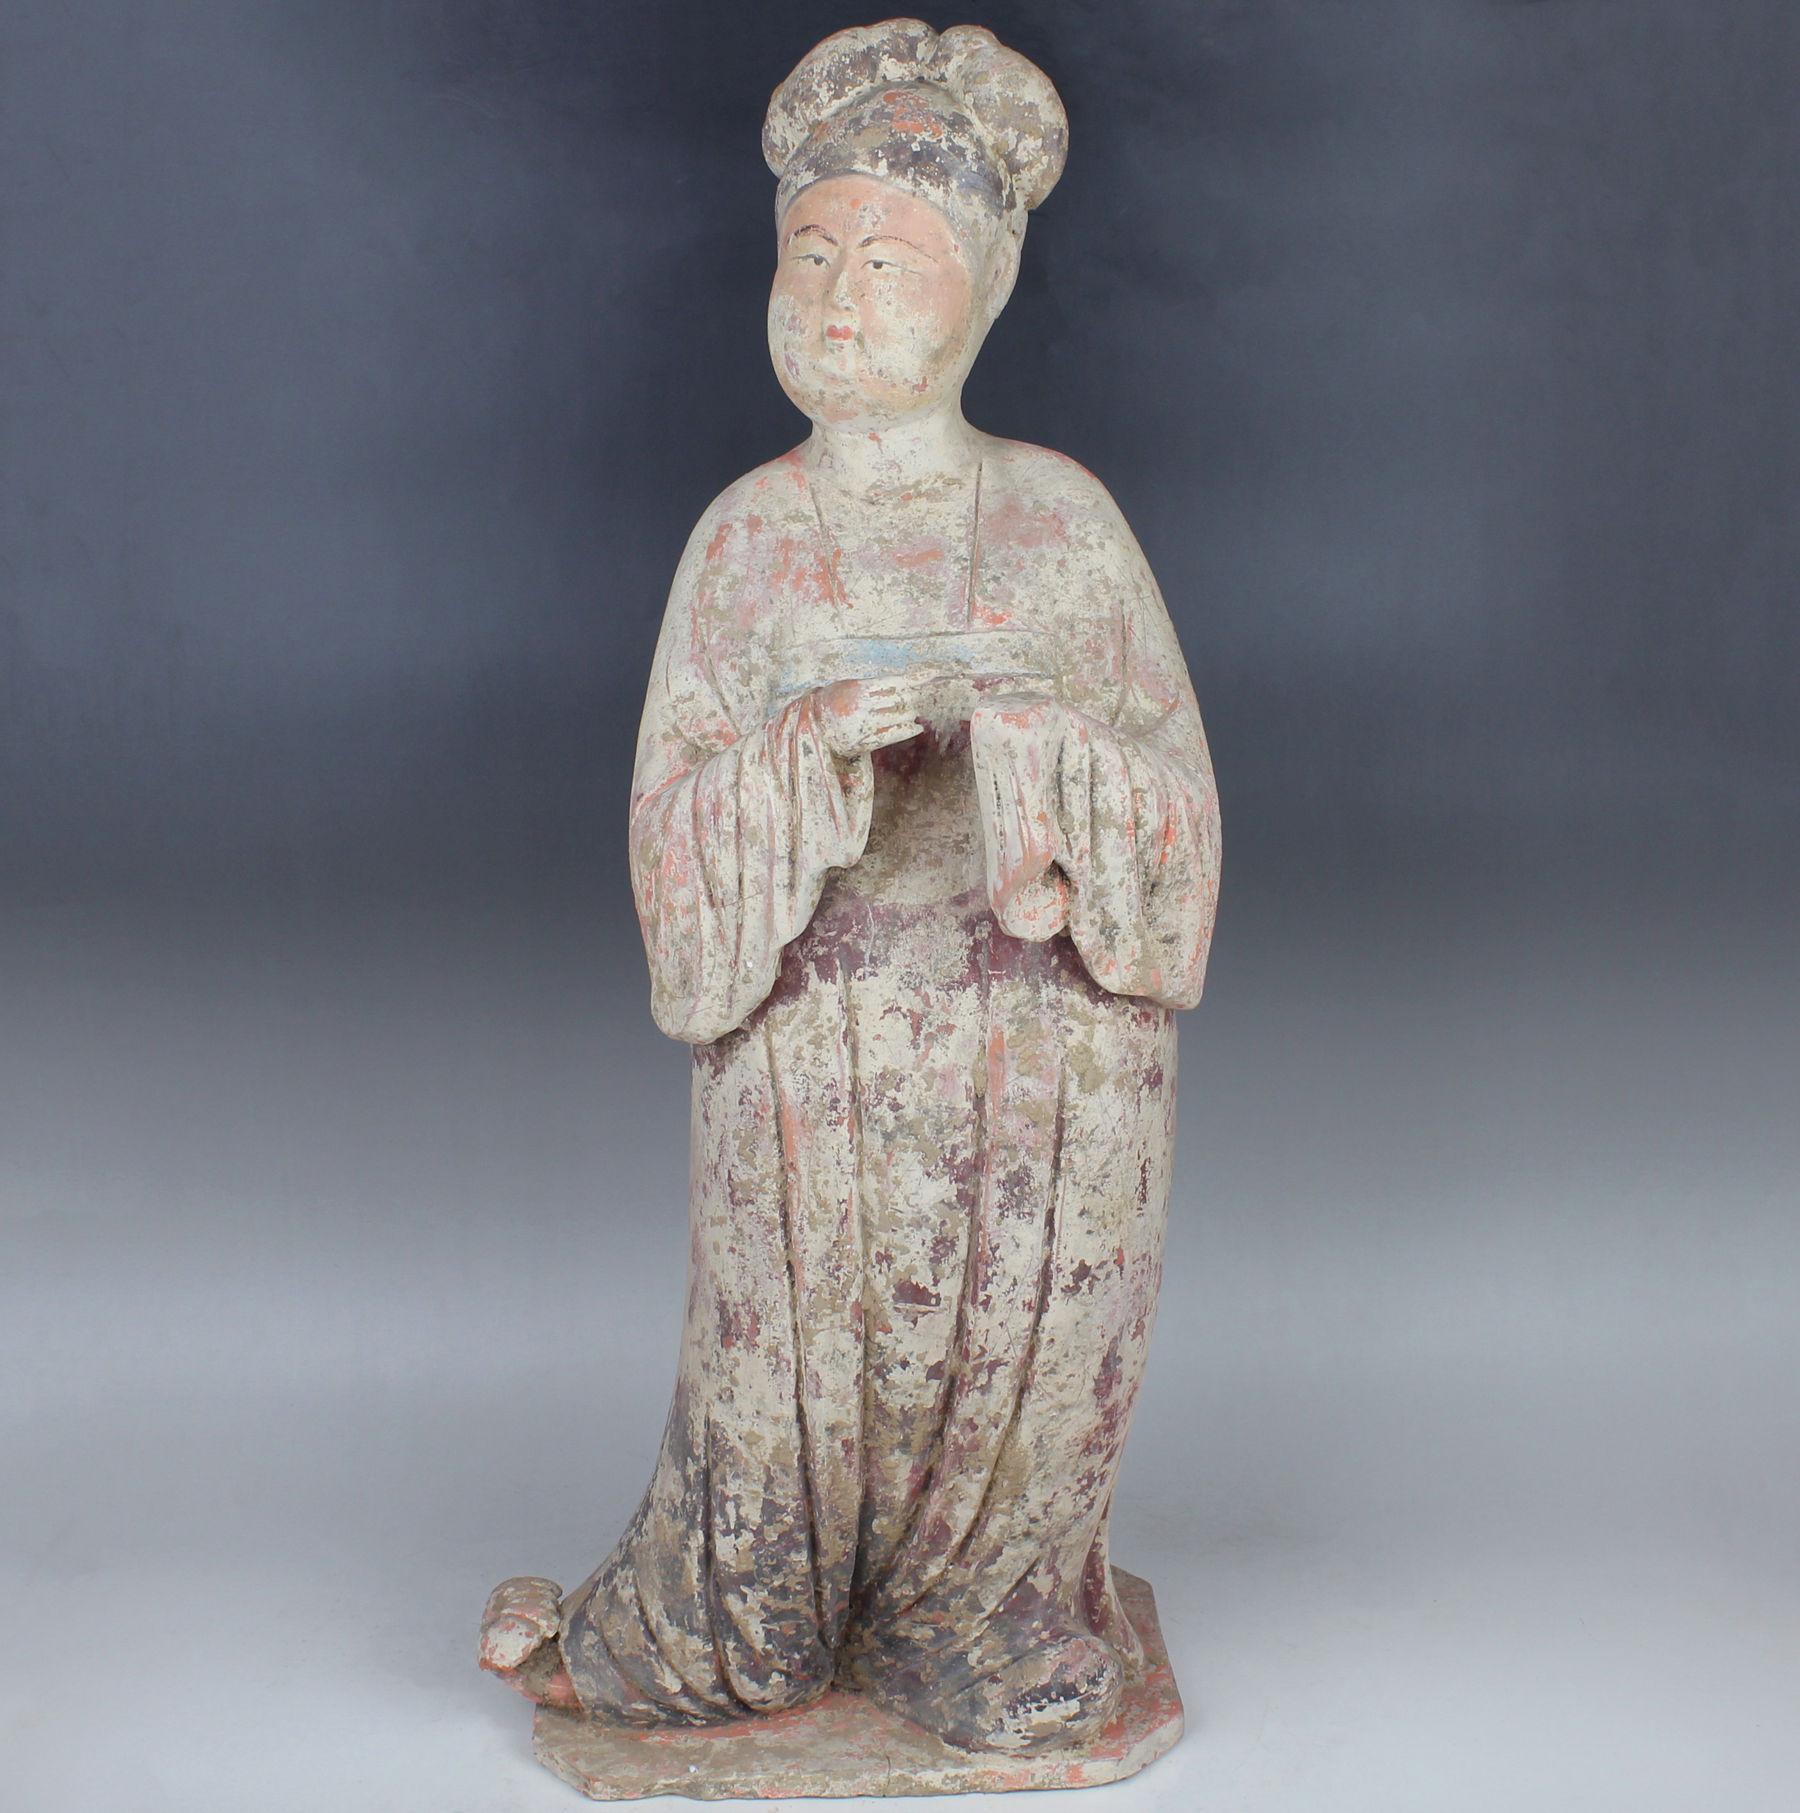 ITEM: Statuette of a Fat Lady
MATERIAL: Pottery
CULTURE: Chinese, Tang Dynasty
PERIOD: 618 – 907 A.D
DIMENSIONS: 655 mm x 265 mm x 210 mm
CONDITION: Good condition. Includes Thermoluminescence test by Laboratory Kotalla (Reference 05B101123).